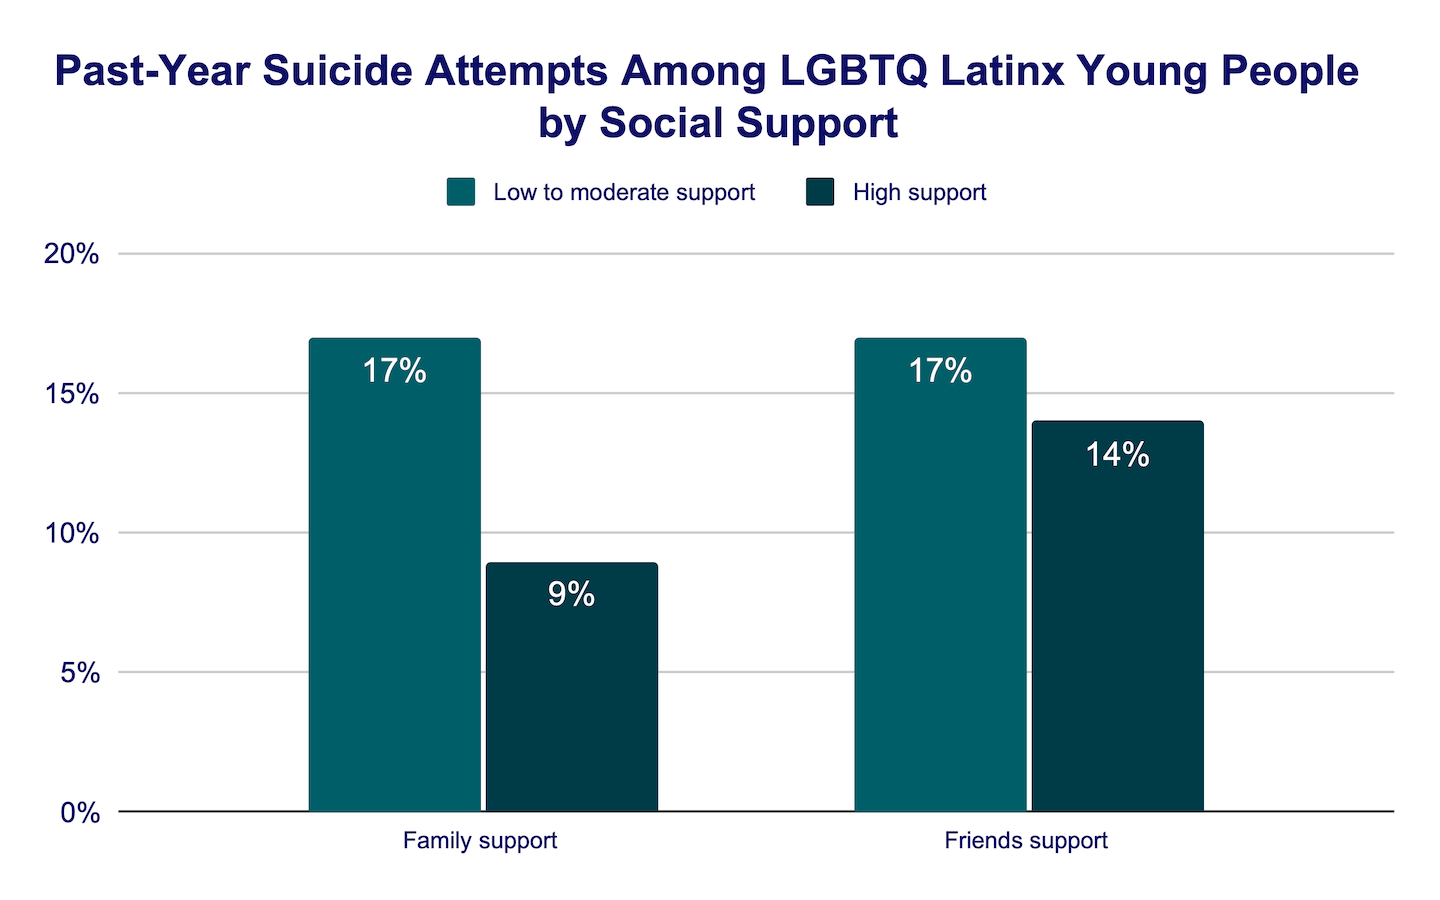 Past-year suicide attempts among LGBTQ Latinx young people by social support bar graph